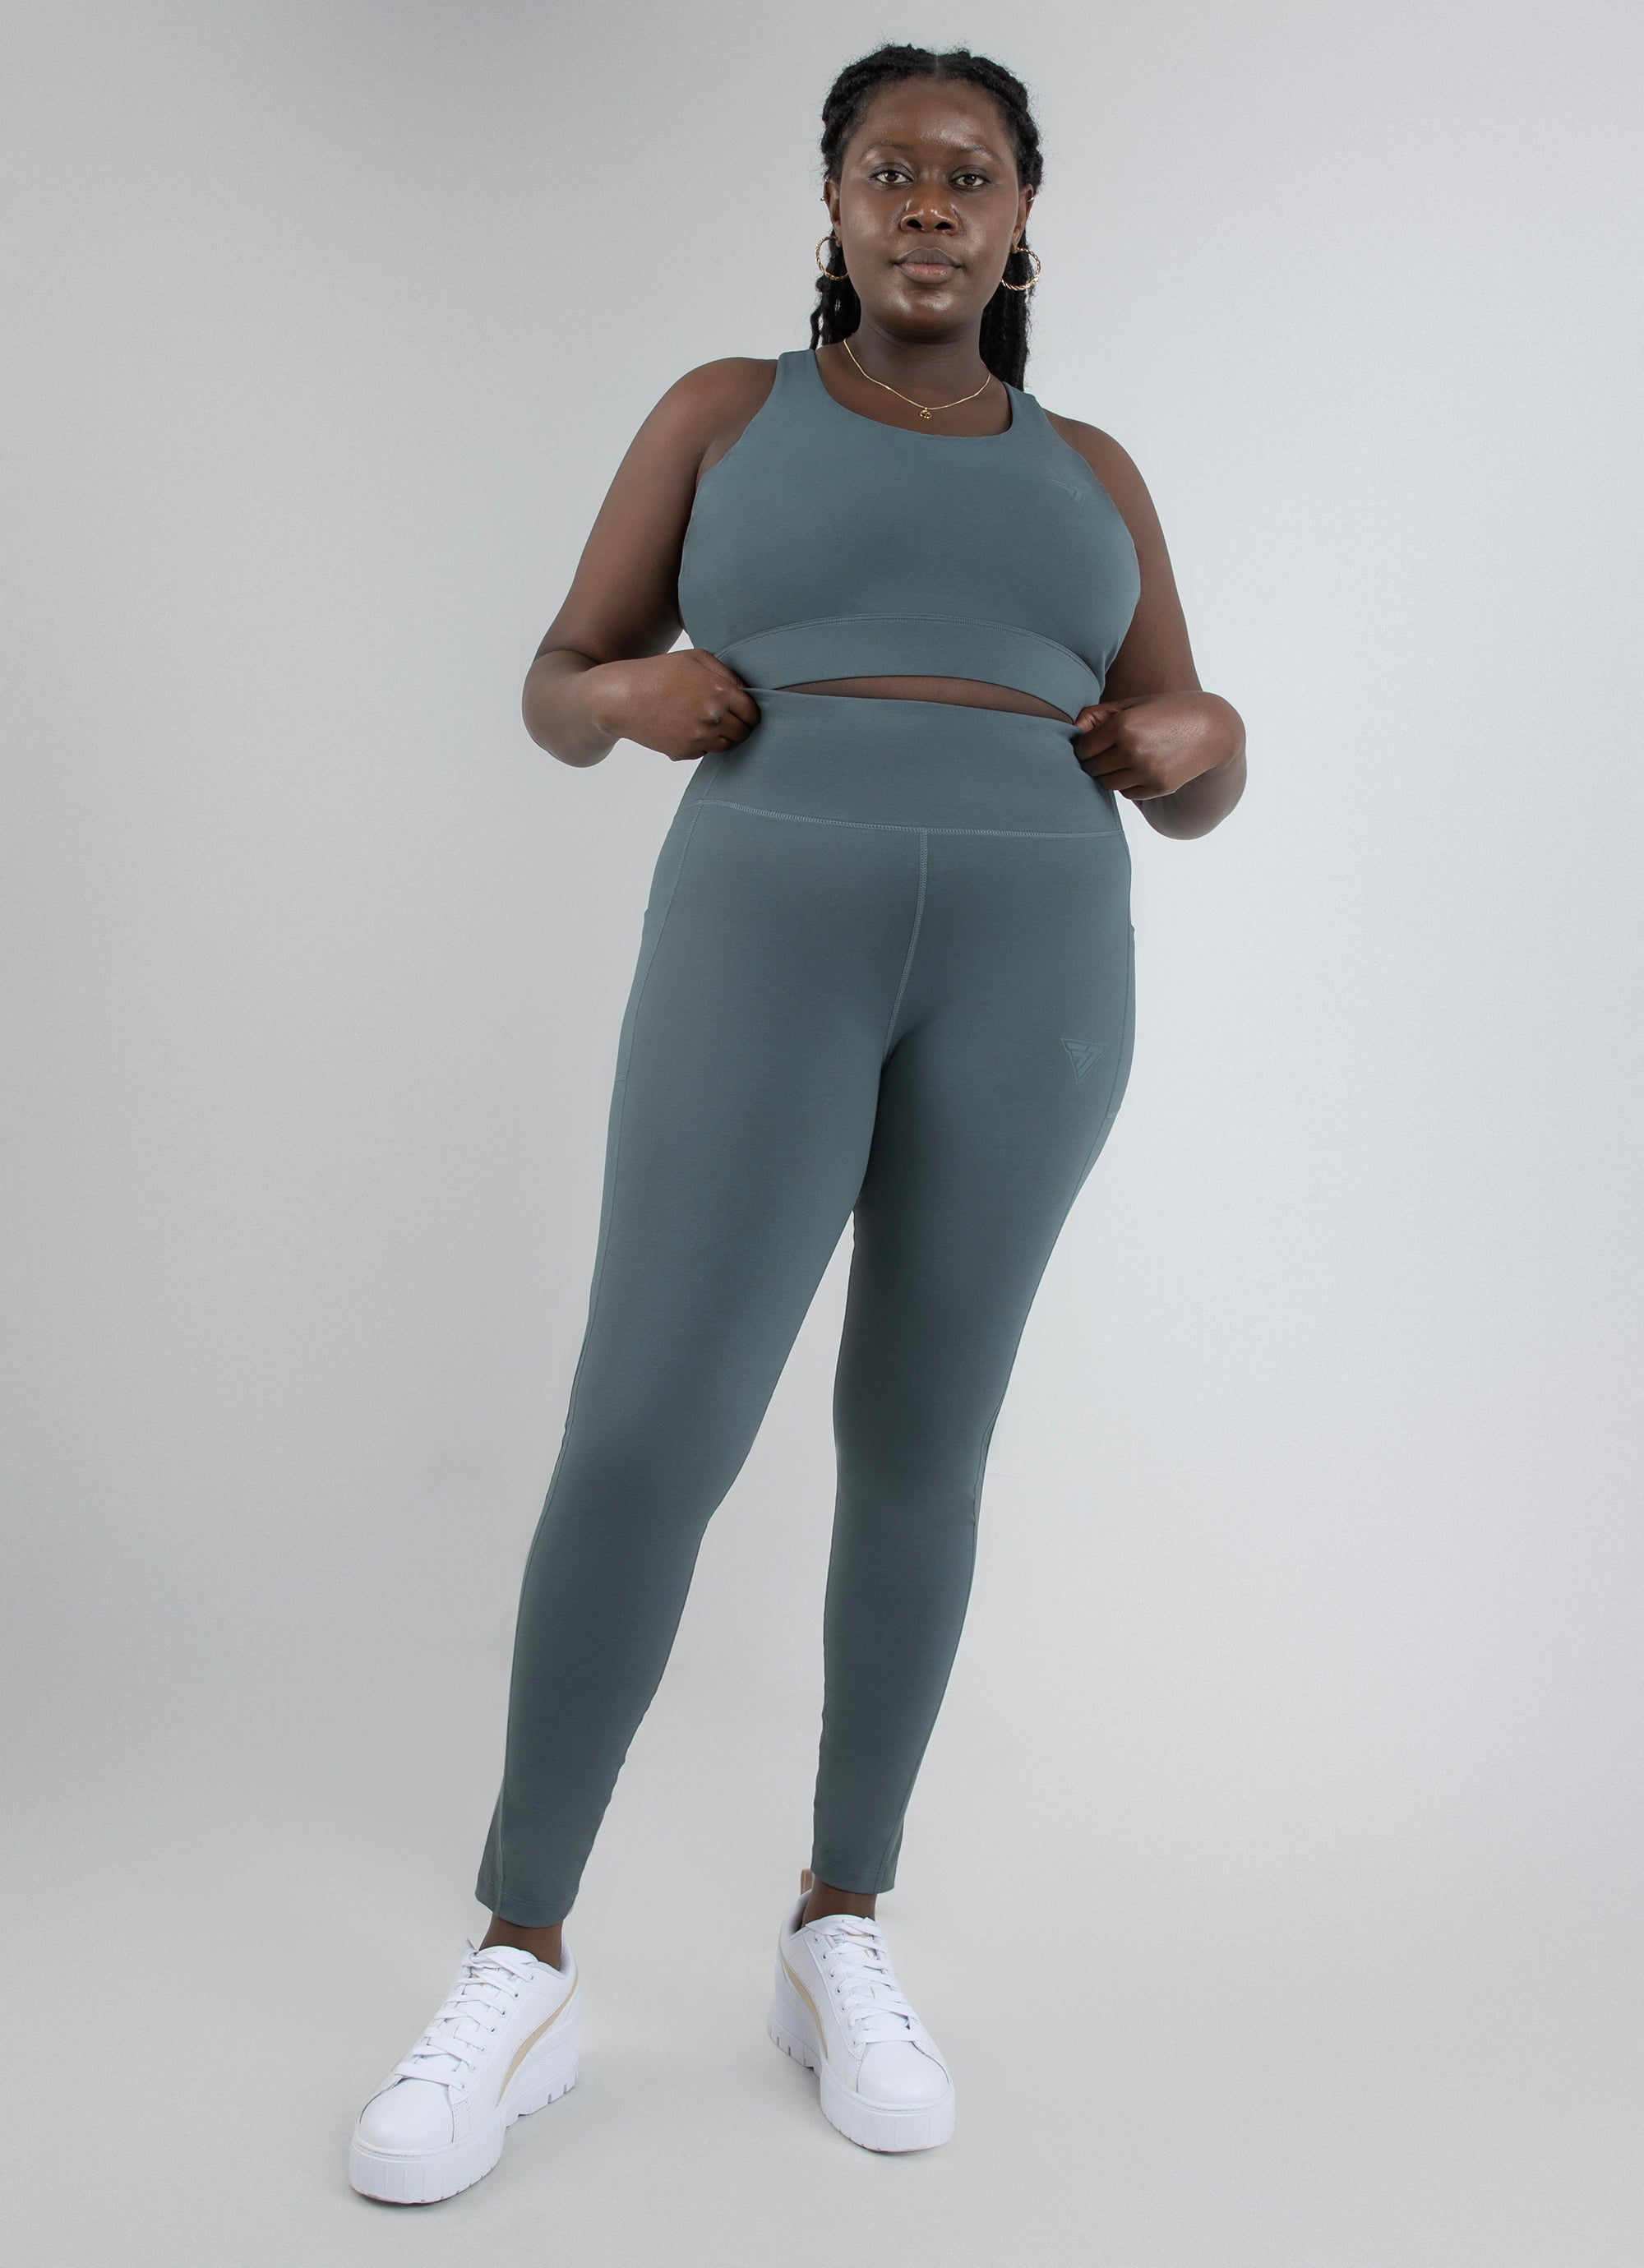 Stryde Try Out Leggings - Curve in Green